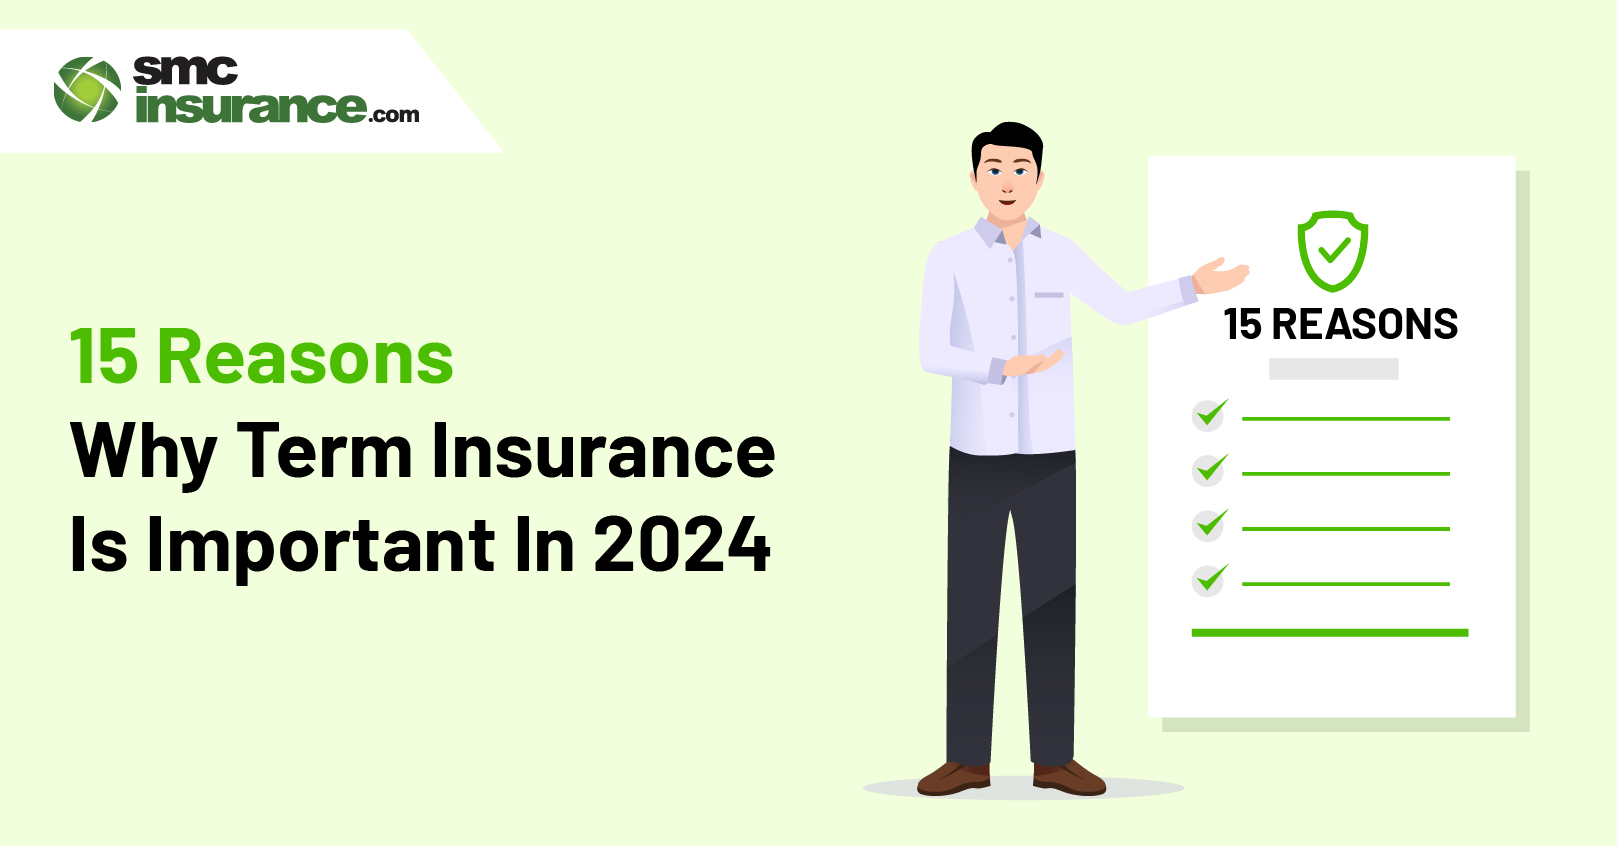 15 Reasons Why Term Insurance Is Important In 2024